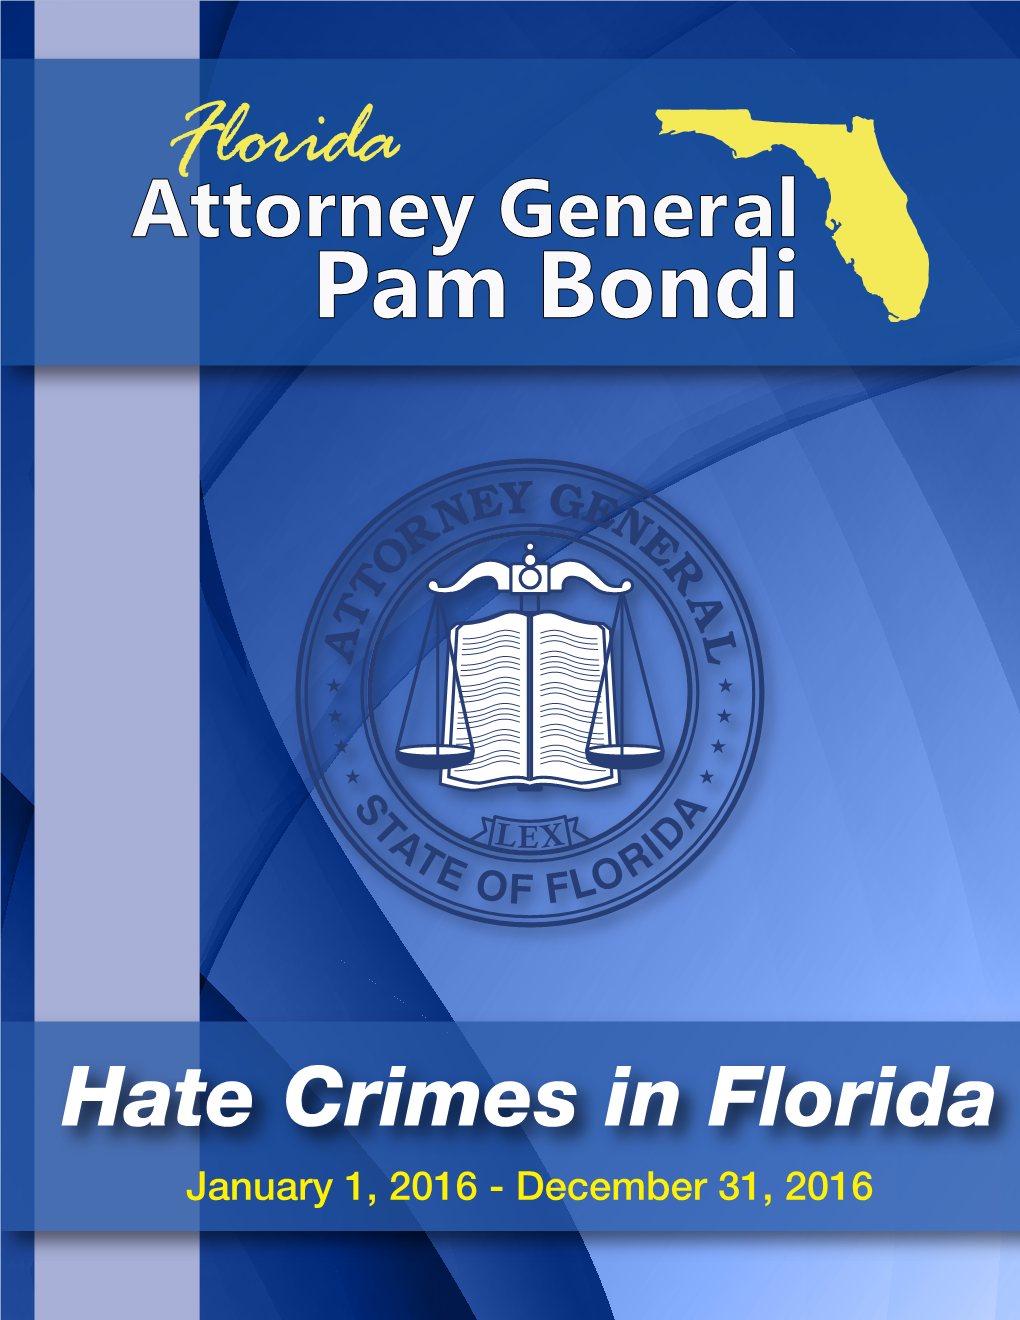 2016 Hate Crimes in Florida Report Covers the Period from January 1, 2016, Through December 31, 2016